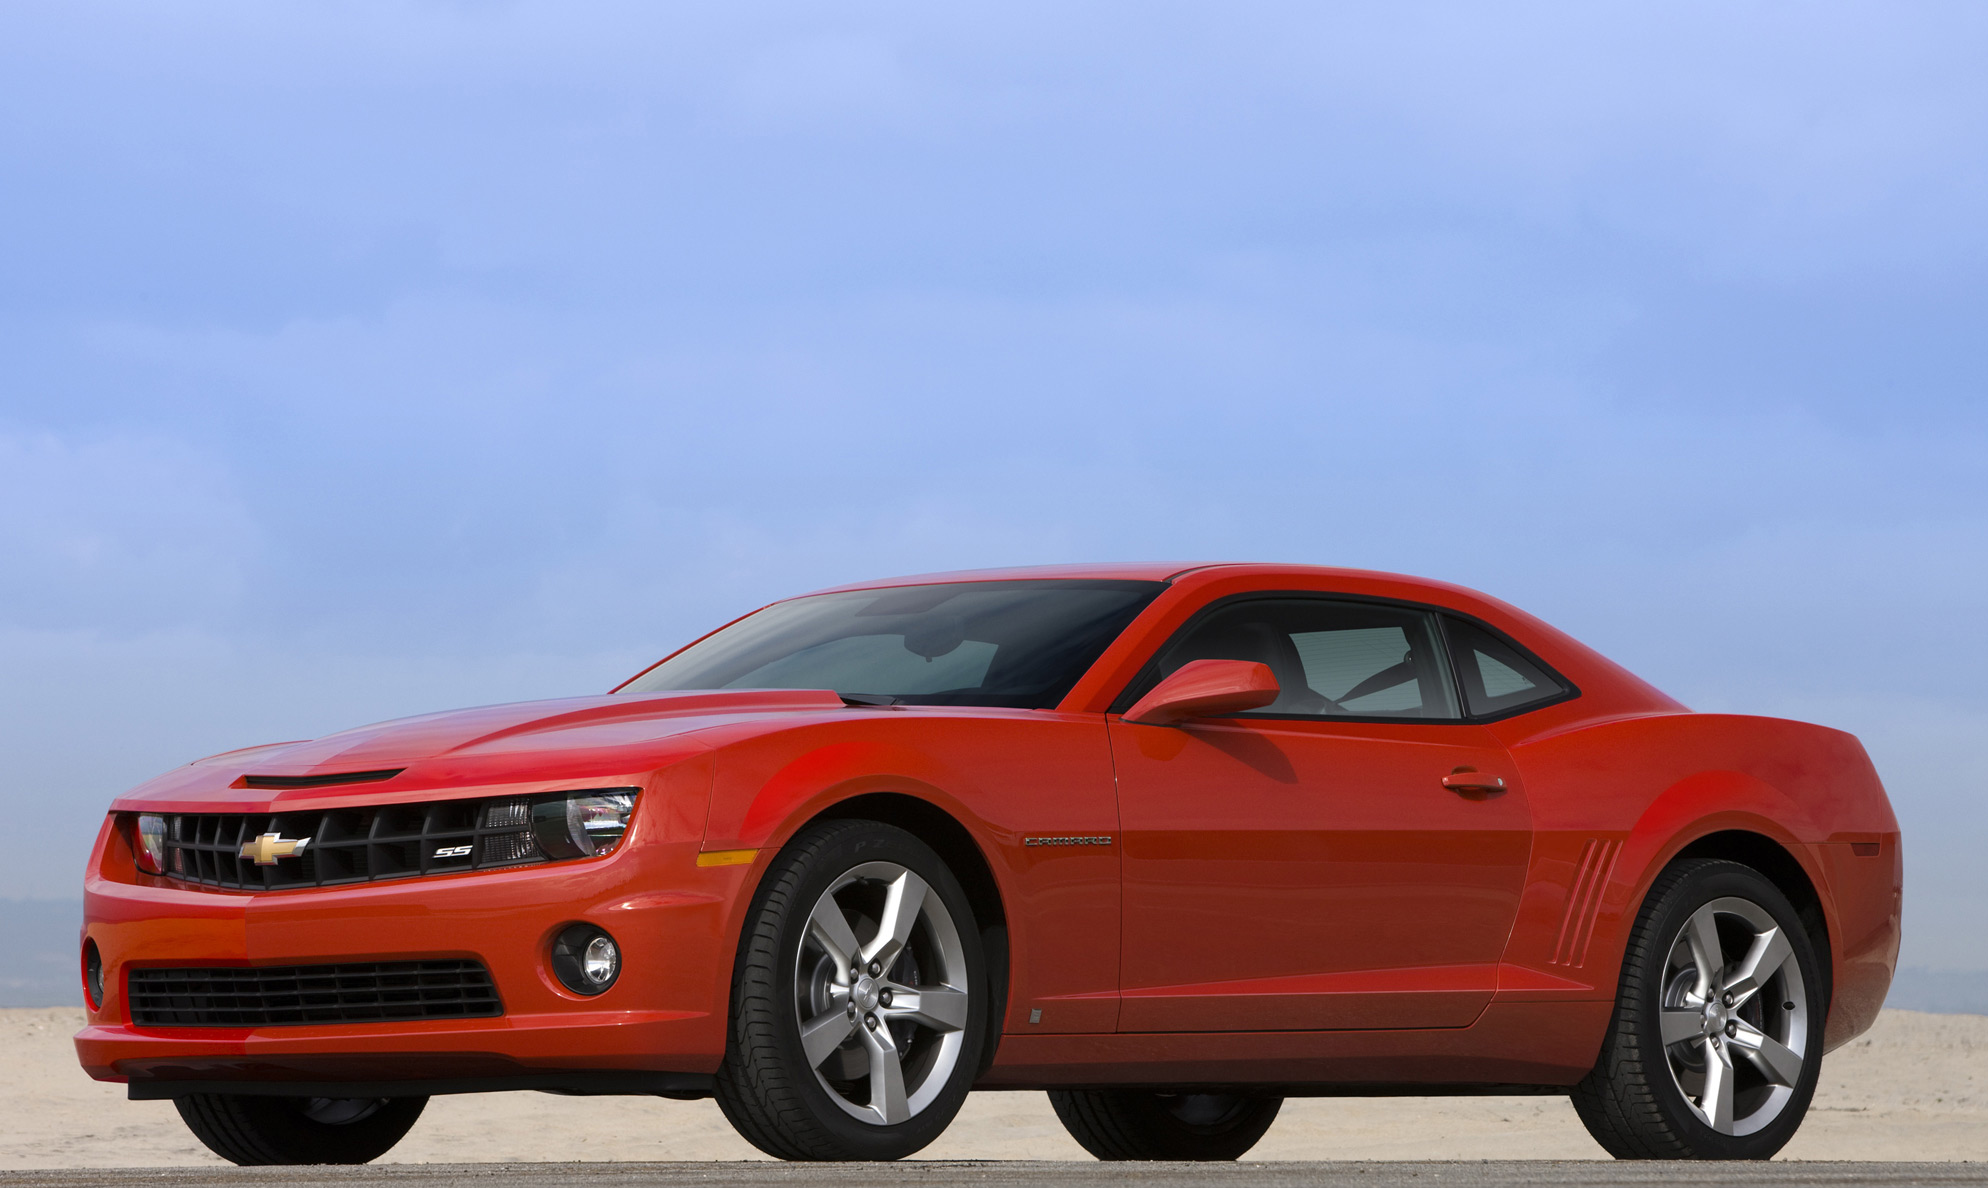 picture of Chevrolet Camaro, 2010, SS, red